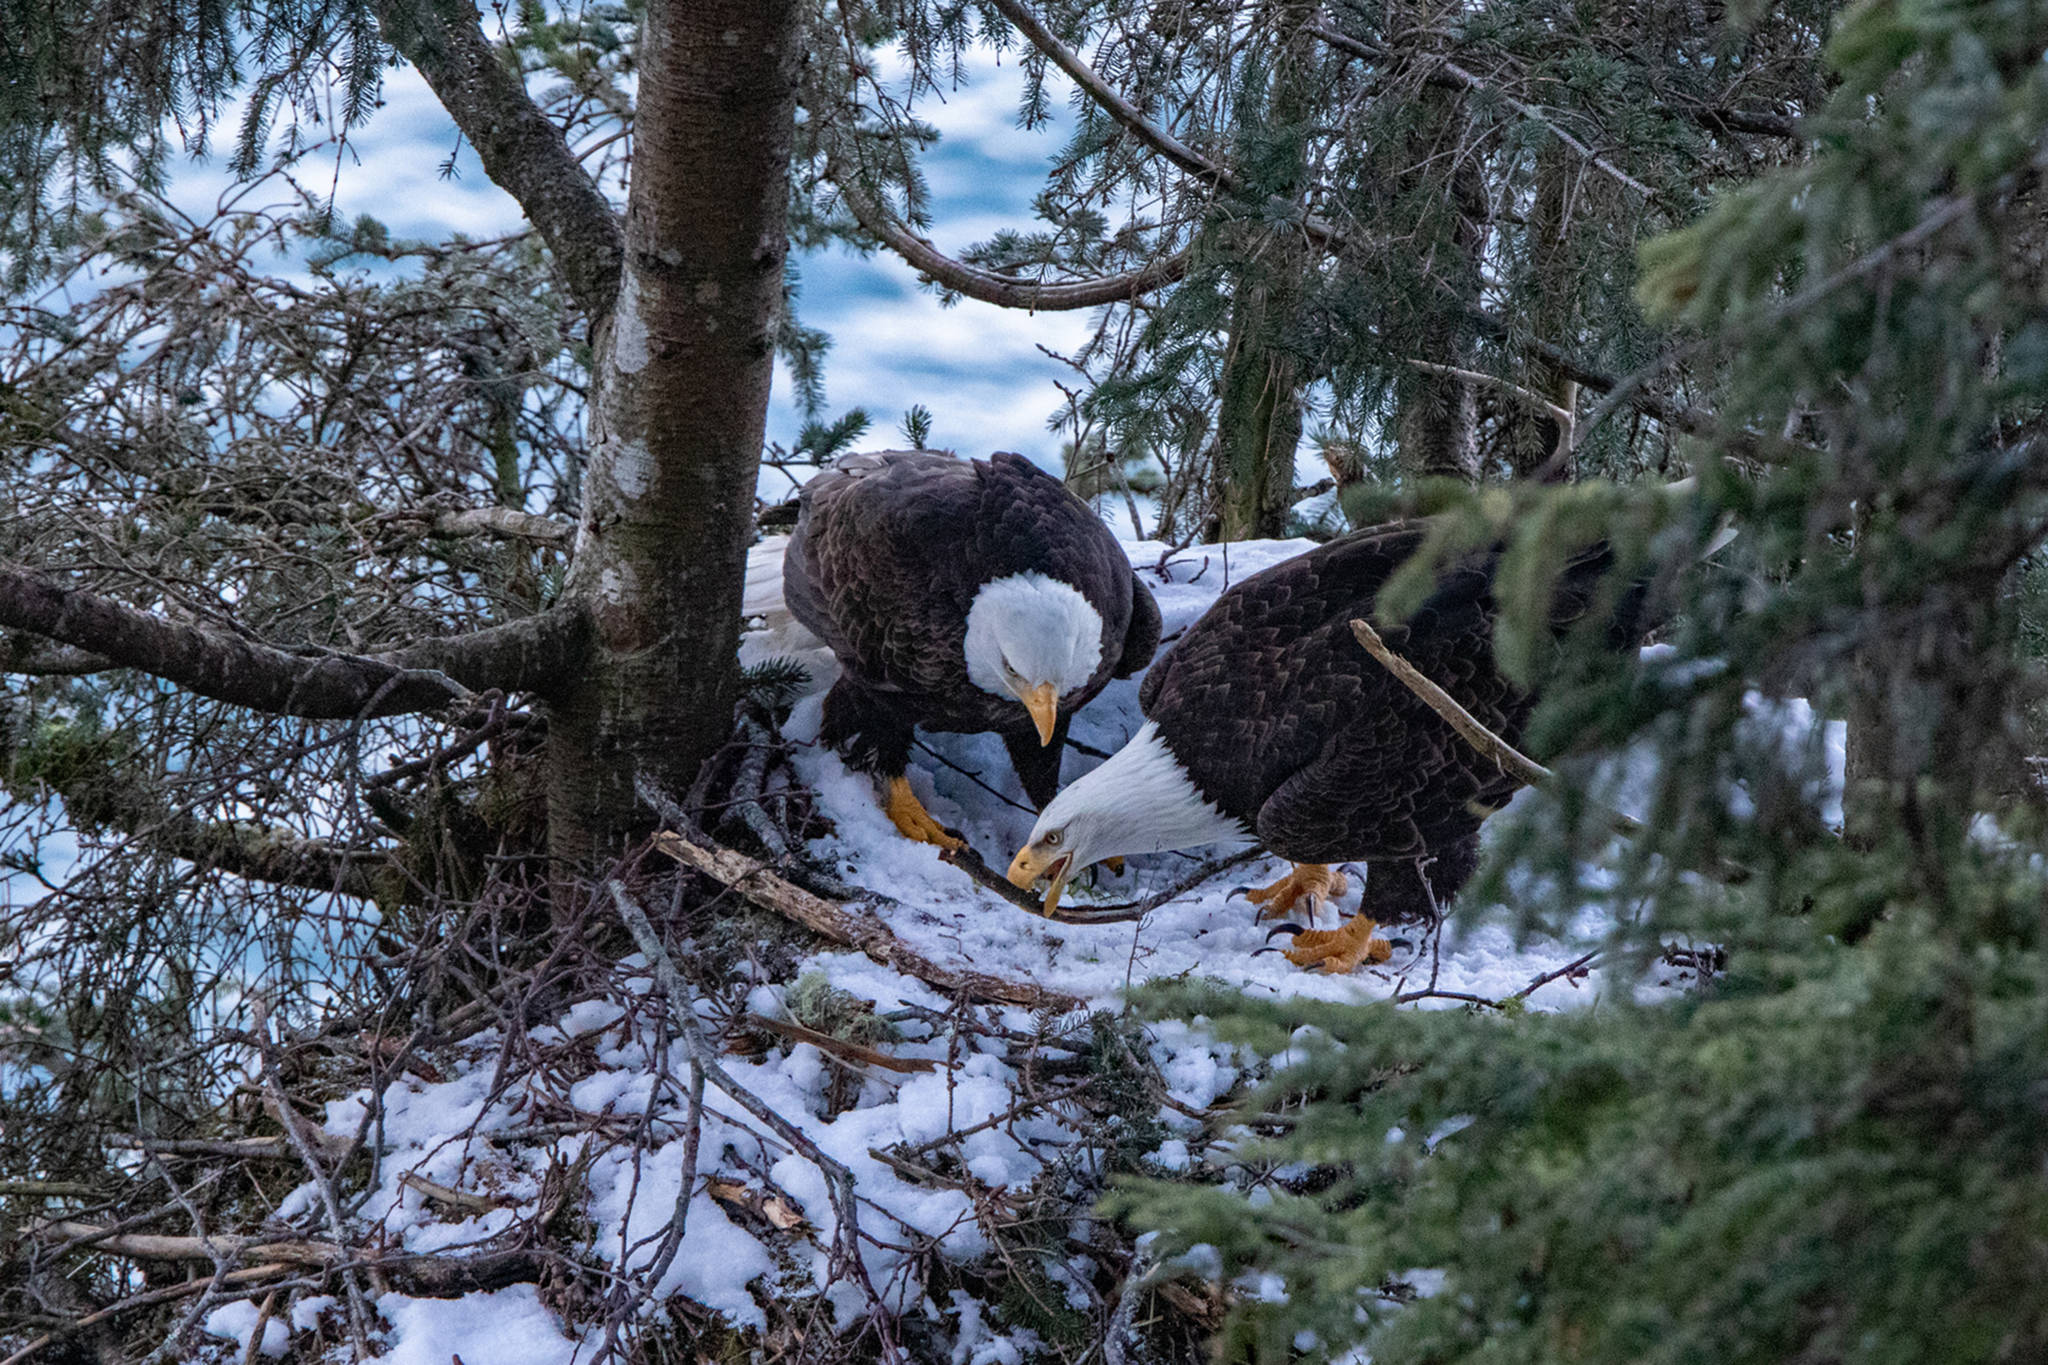 Even with their nest covered in snow the eagles are making improvements. (Courtesy Photo / Jos Bakker)